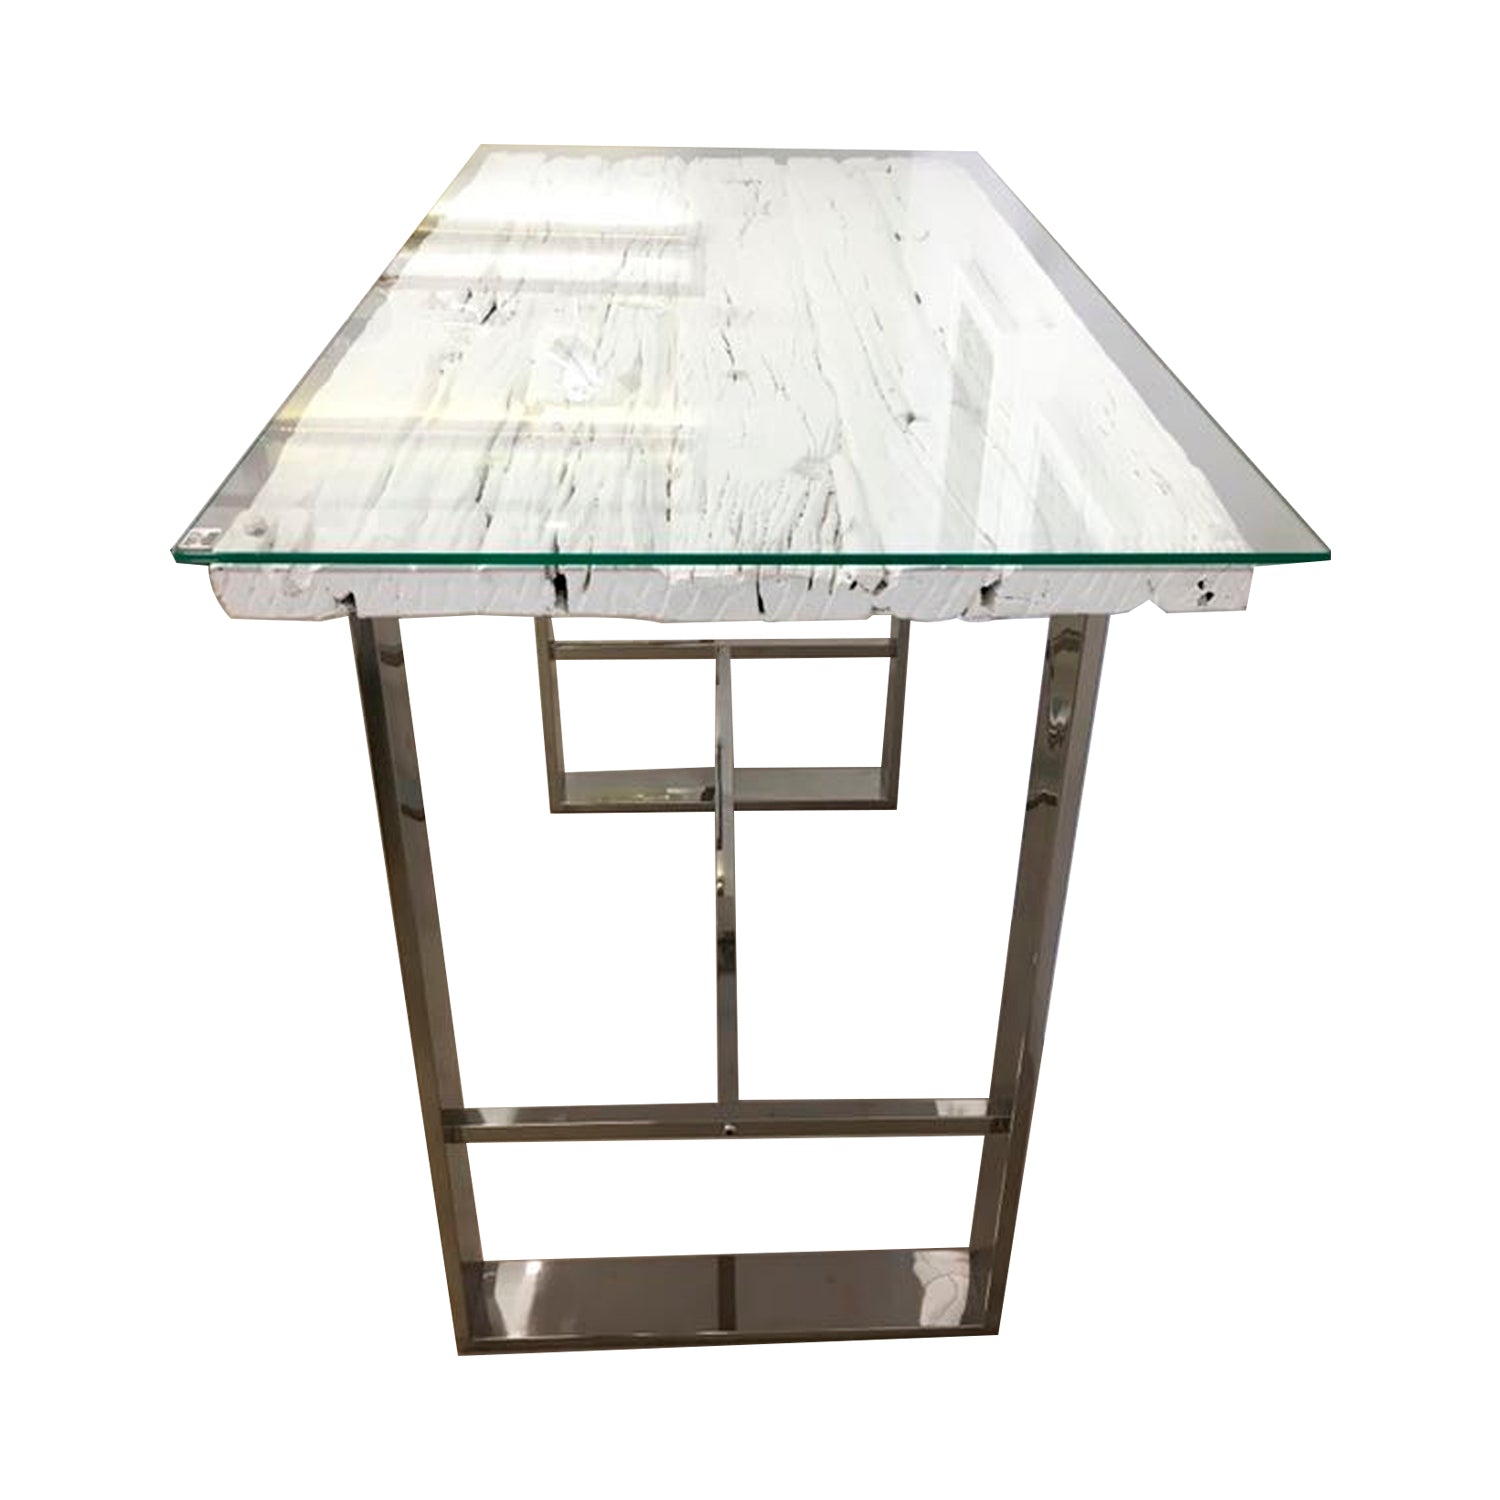 WHITE WOOD, GLASS AND STEEL BAR TABLE